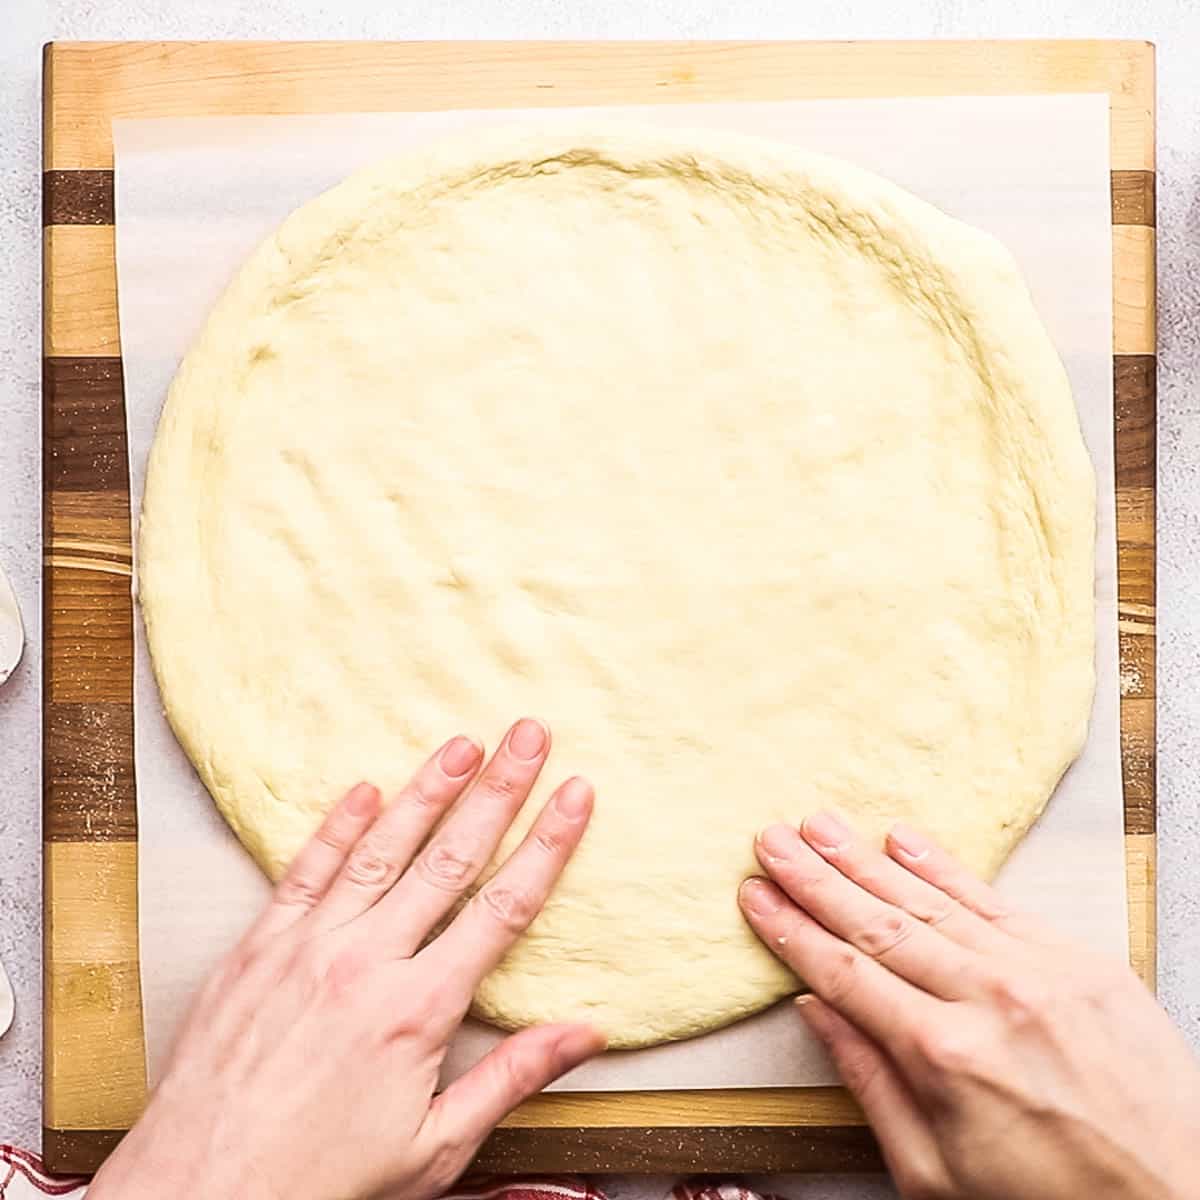 Pizza dough being stretched into a circle.